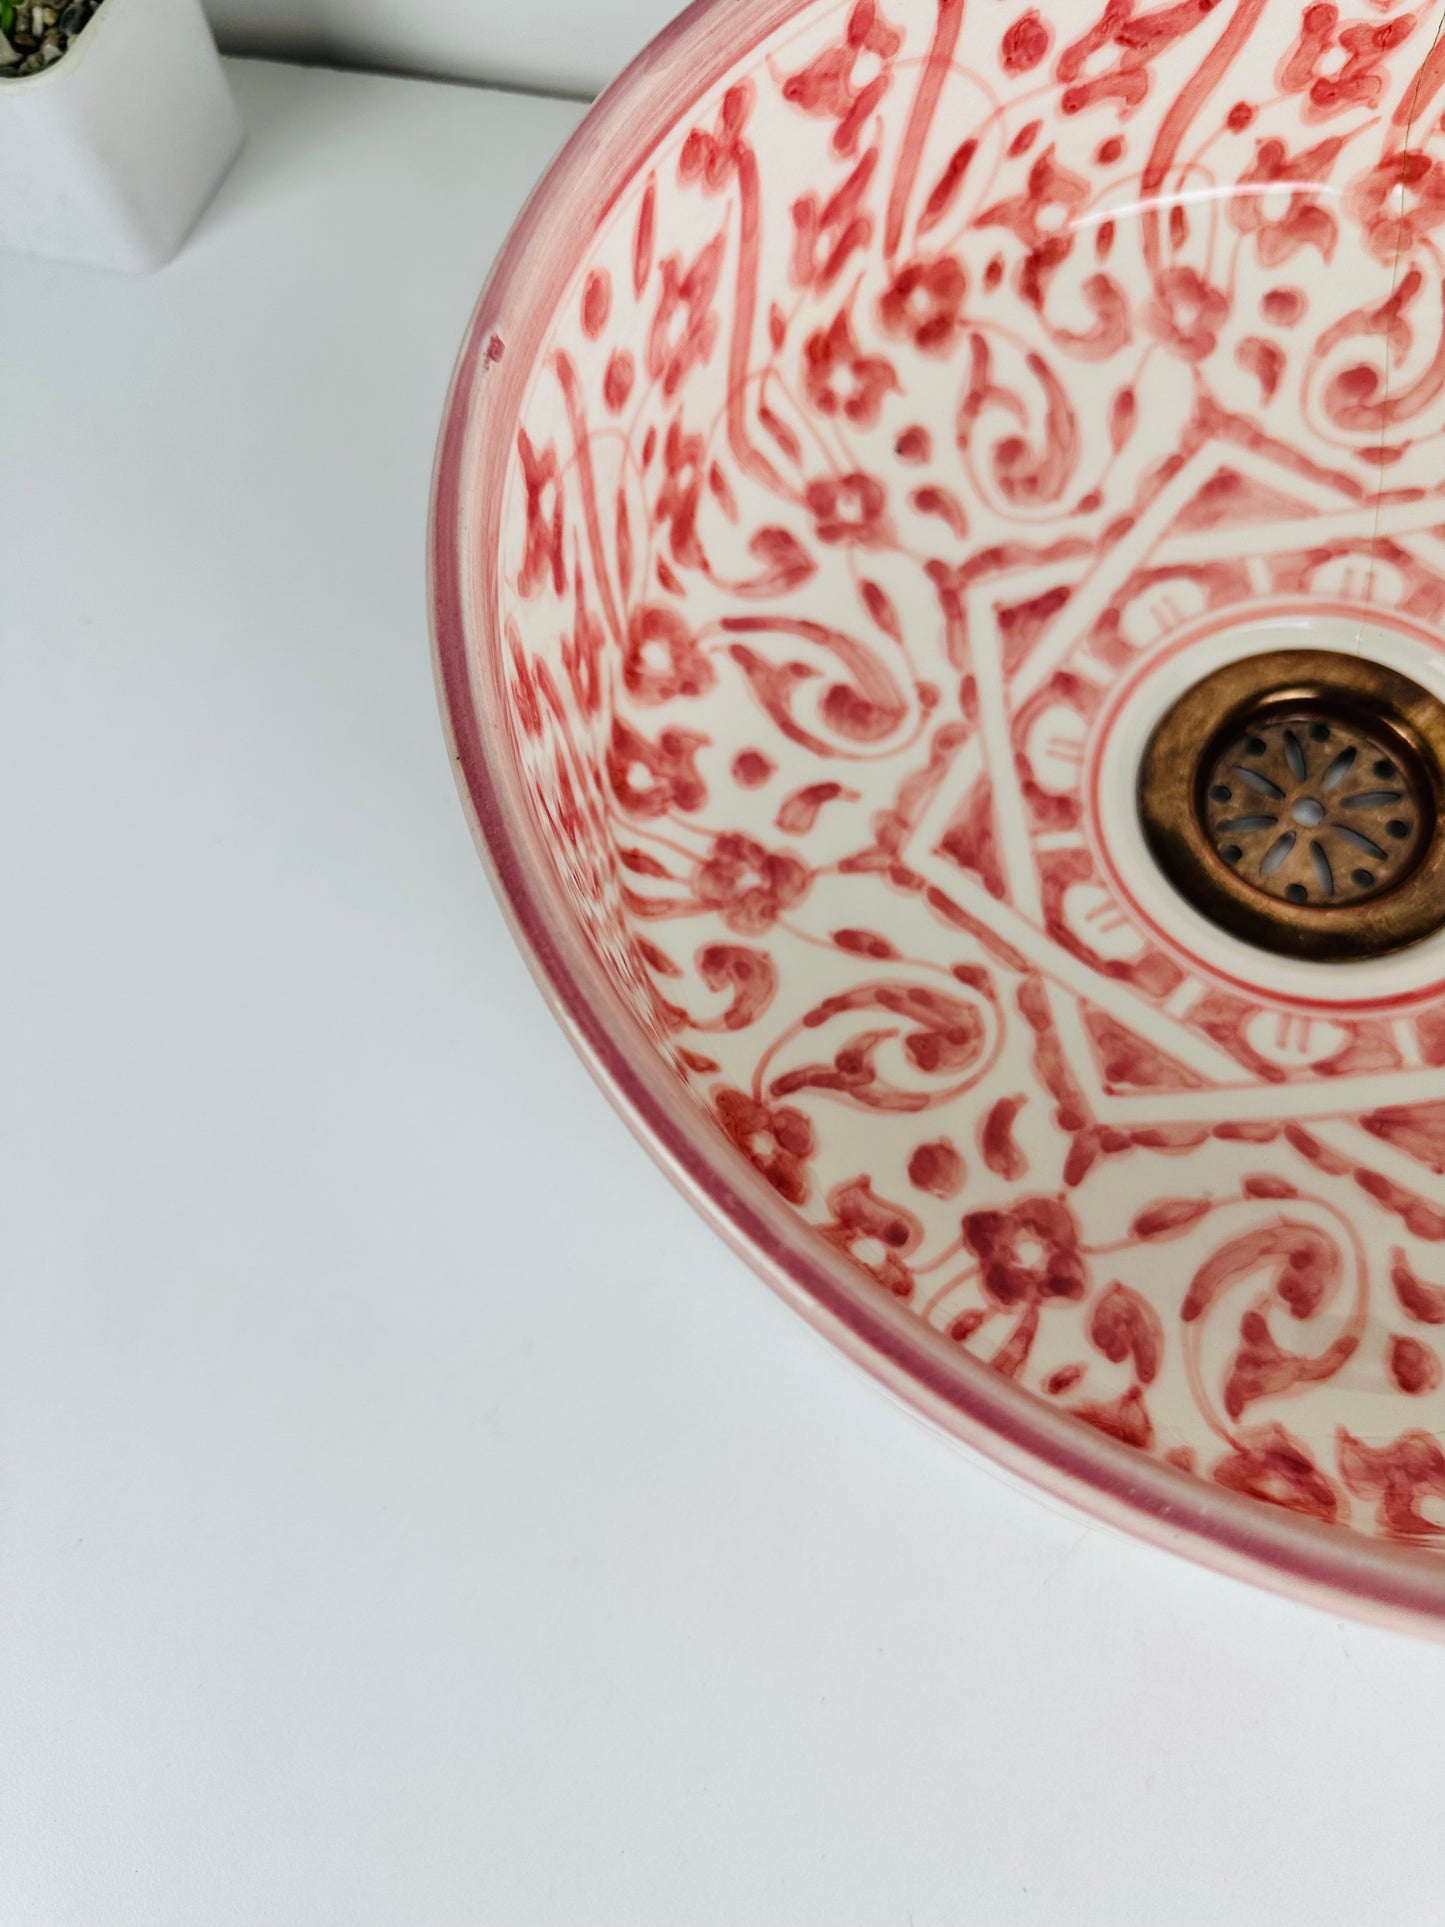 Blushing Red: Handcrafted Ceramic Sink in Blush Red Hue